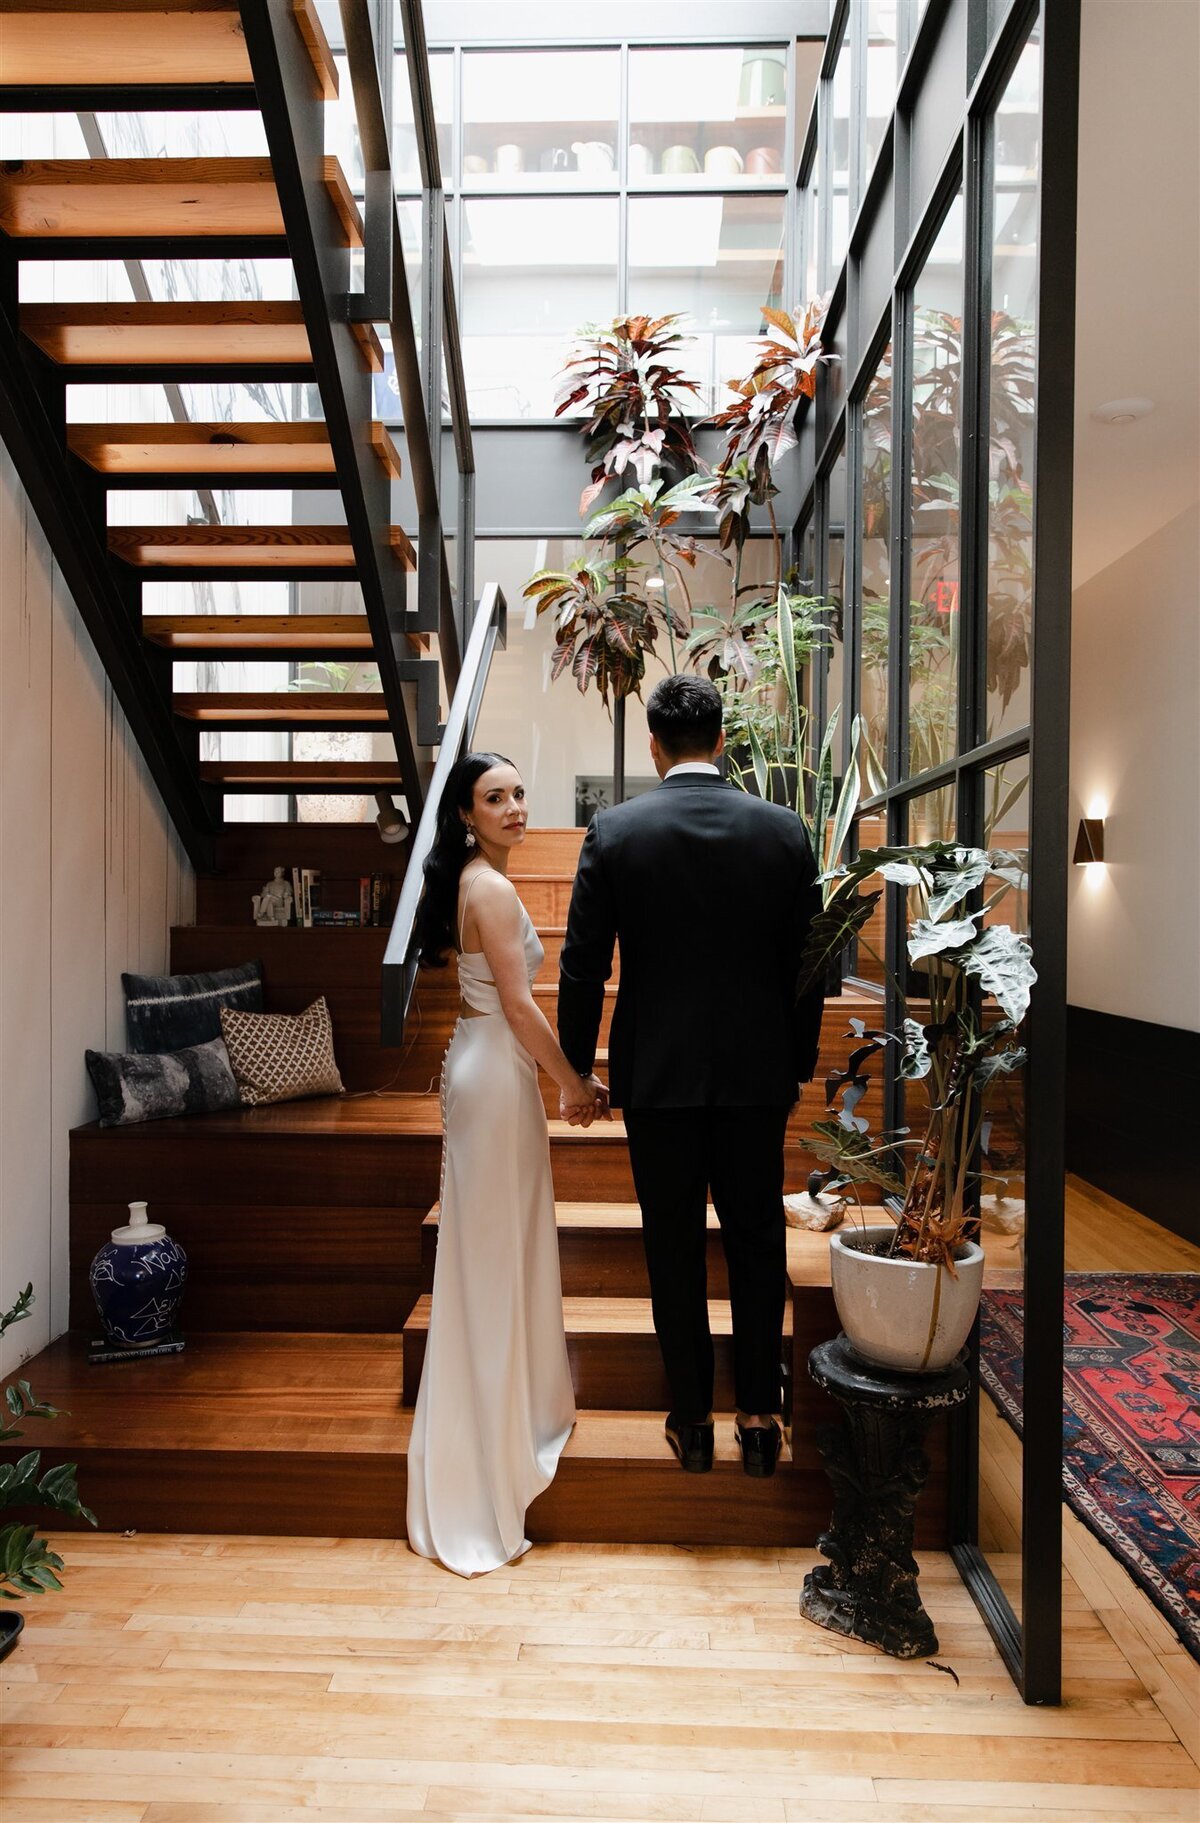 Newlyweds hold hands on modern staircase at a Brewery wedding as bride looks over her shoulder toward the camera.